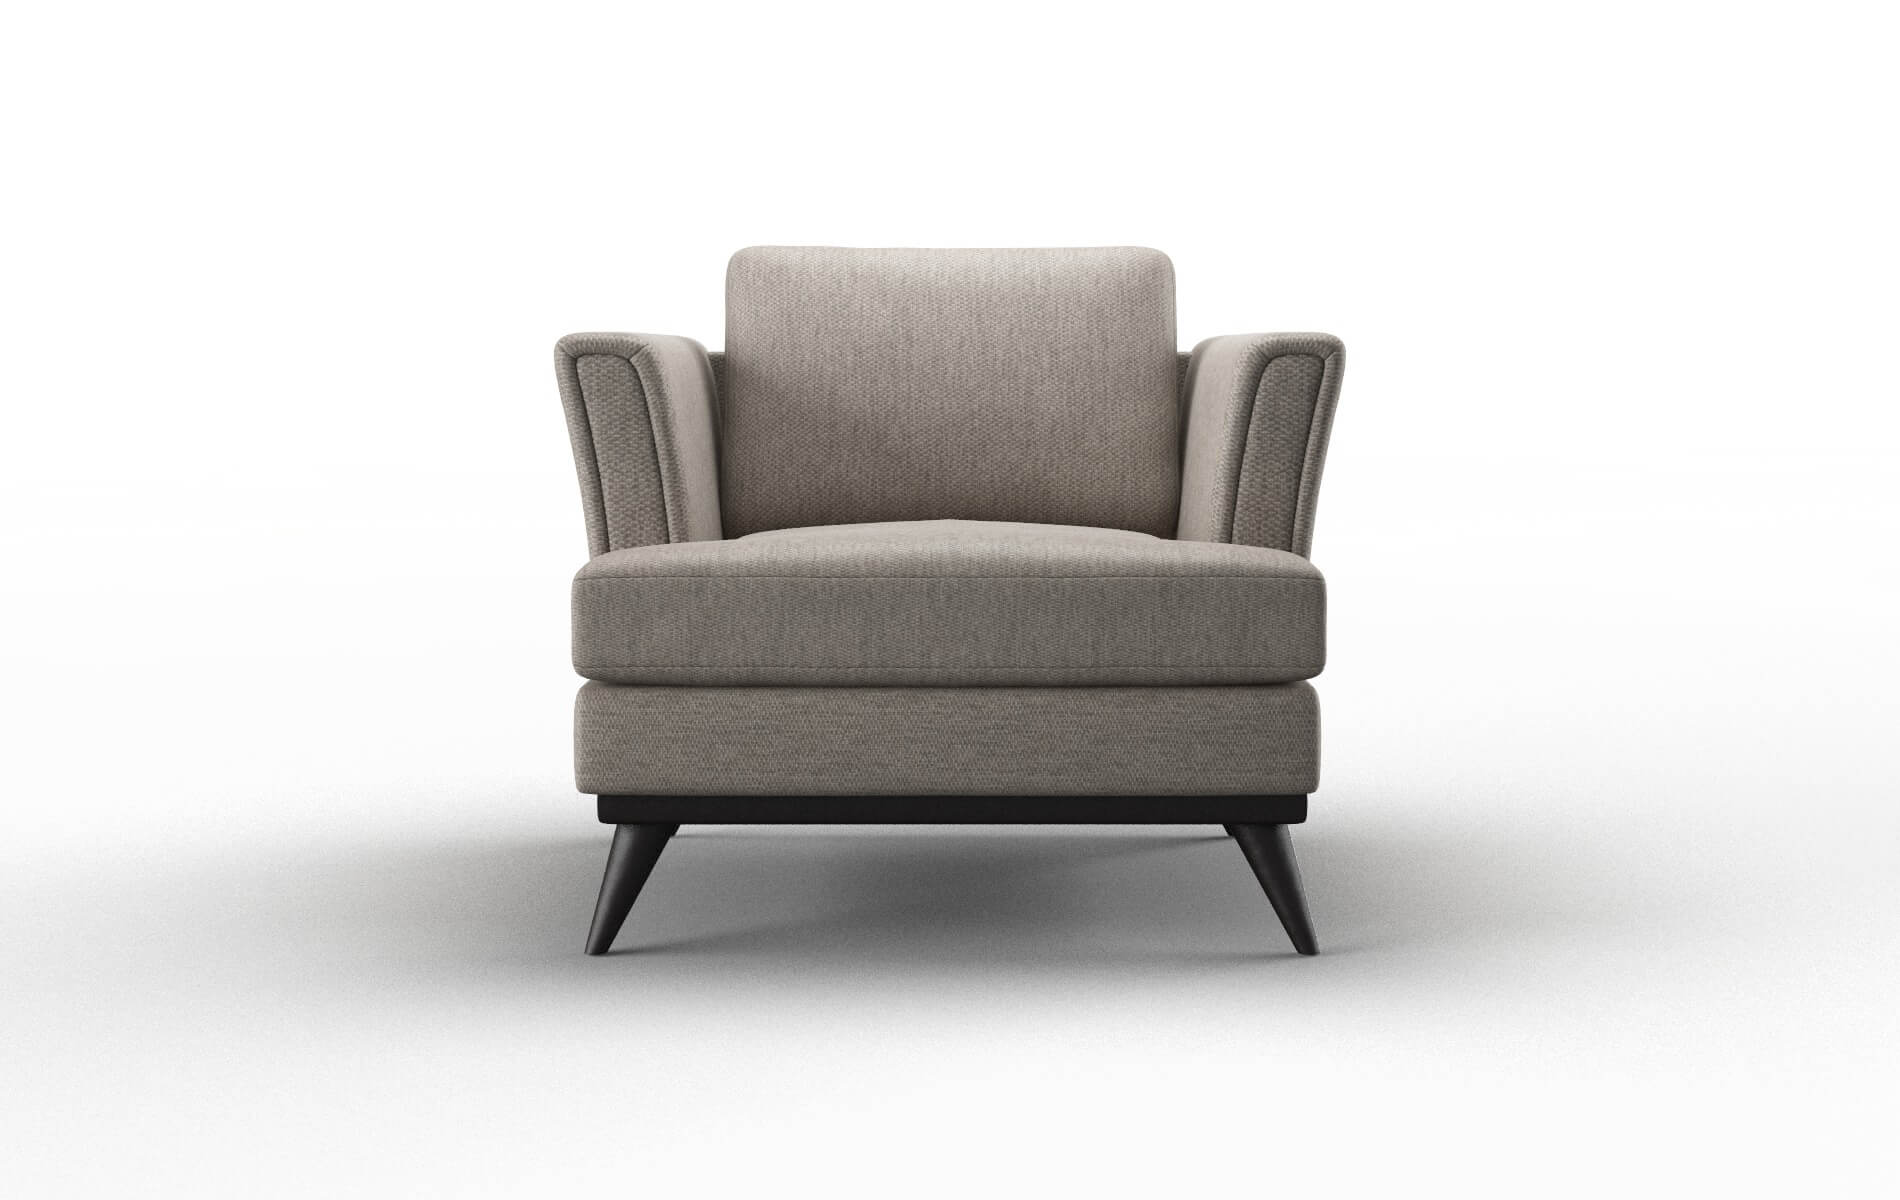 Antalya Cosmo Taupe chair espresso legs